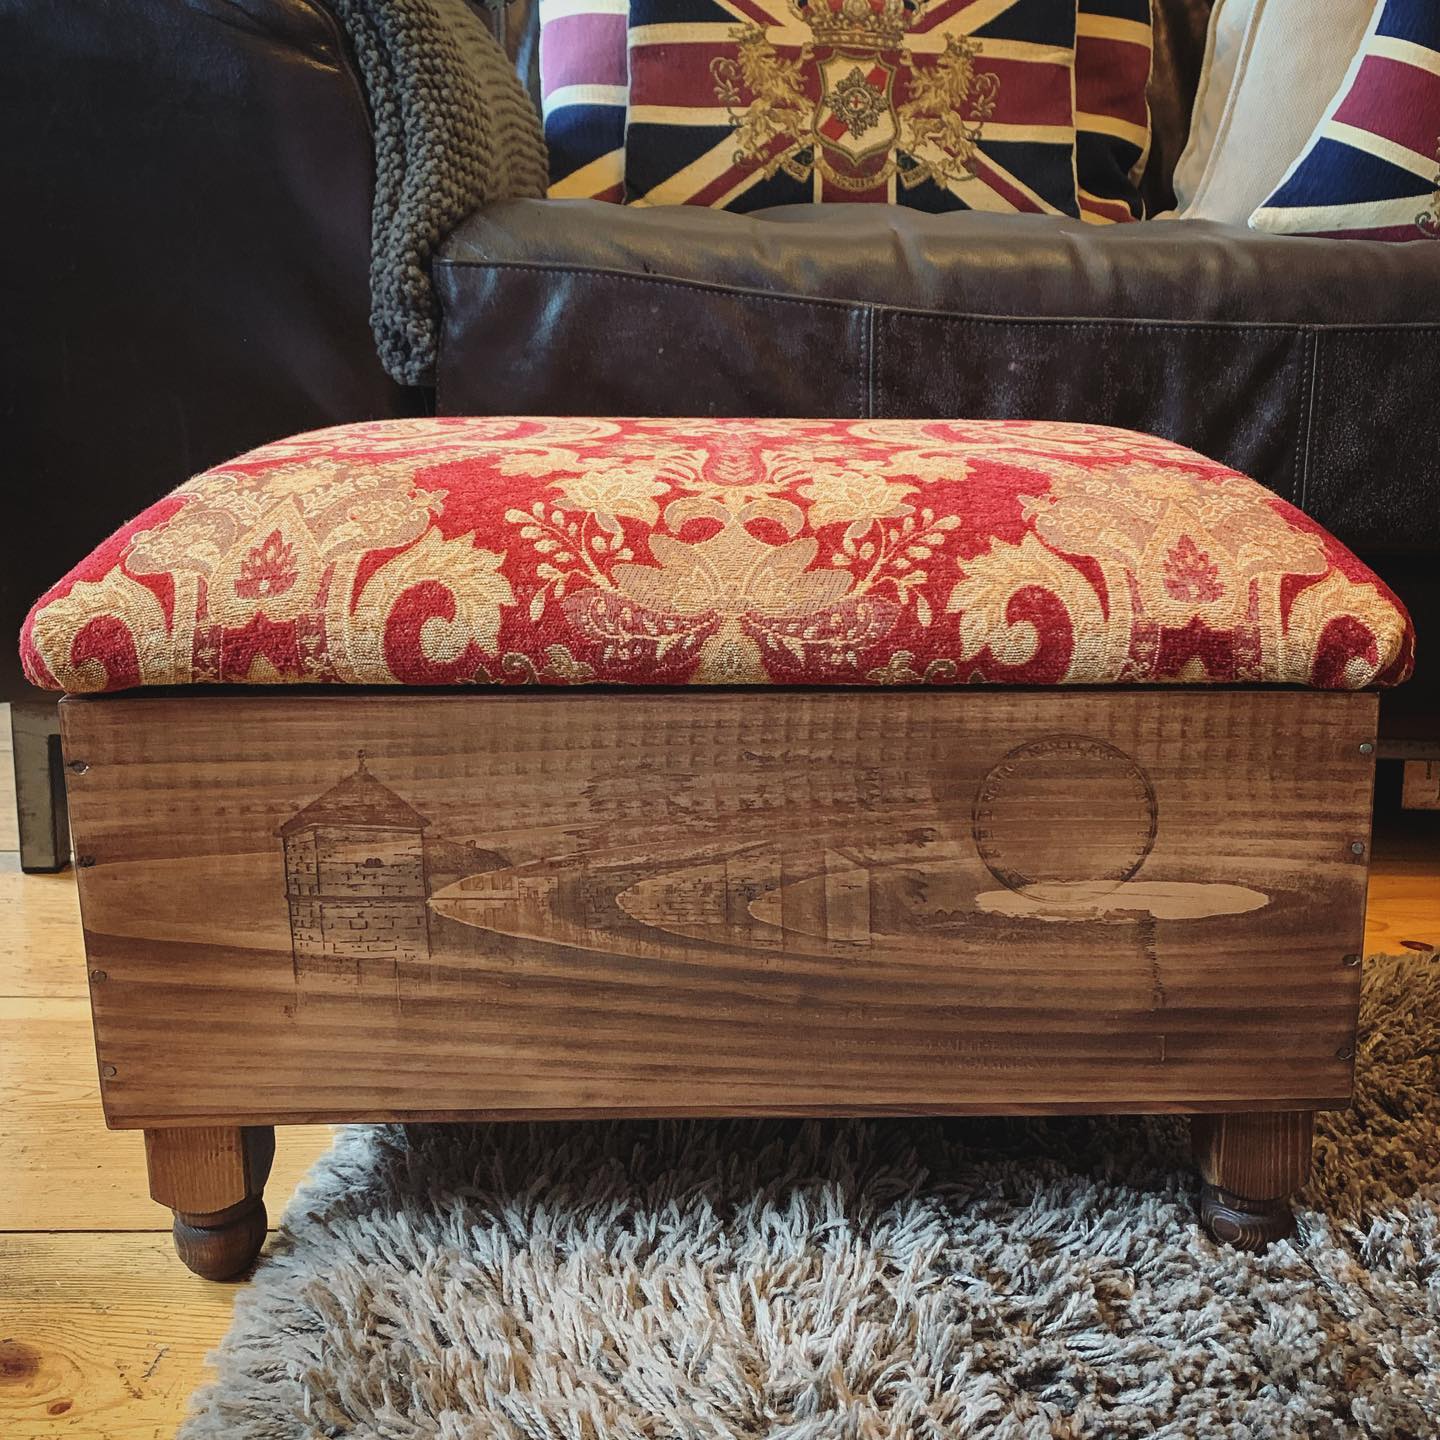 This lovely Winebox ottoman is for sale over on the @bathartisan Facebook group today. (Follow the link in their bio)Head over and browse lots of lovely handcrafted items from independent businesses!...#handcrafted #homewares #unique #jacquard #velvet #richcolours #traditional #bespoke #chateau #damask #beautifulfabric #upholstery #custom #shopnow